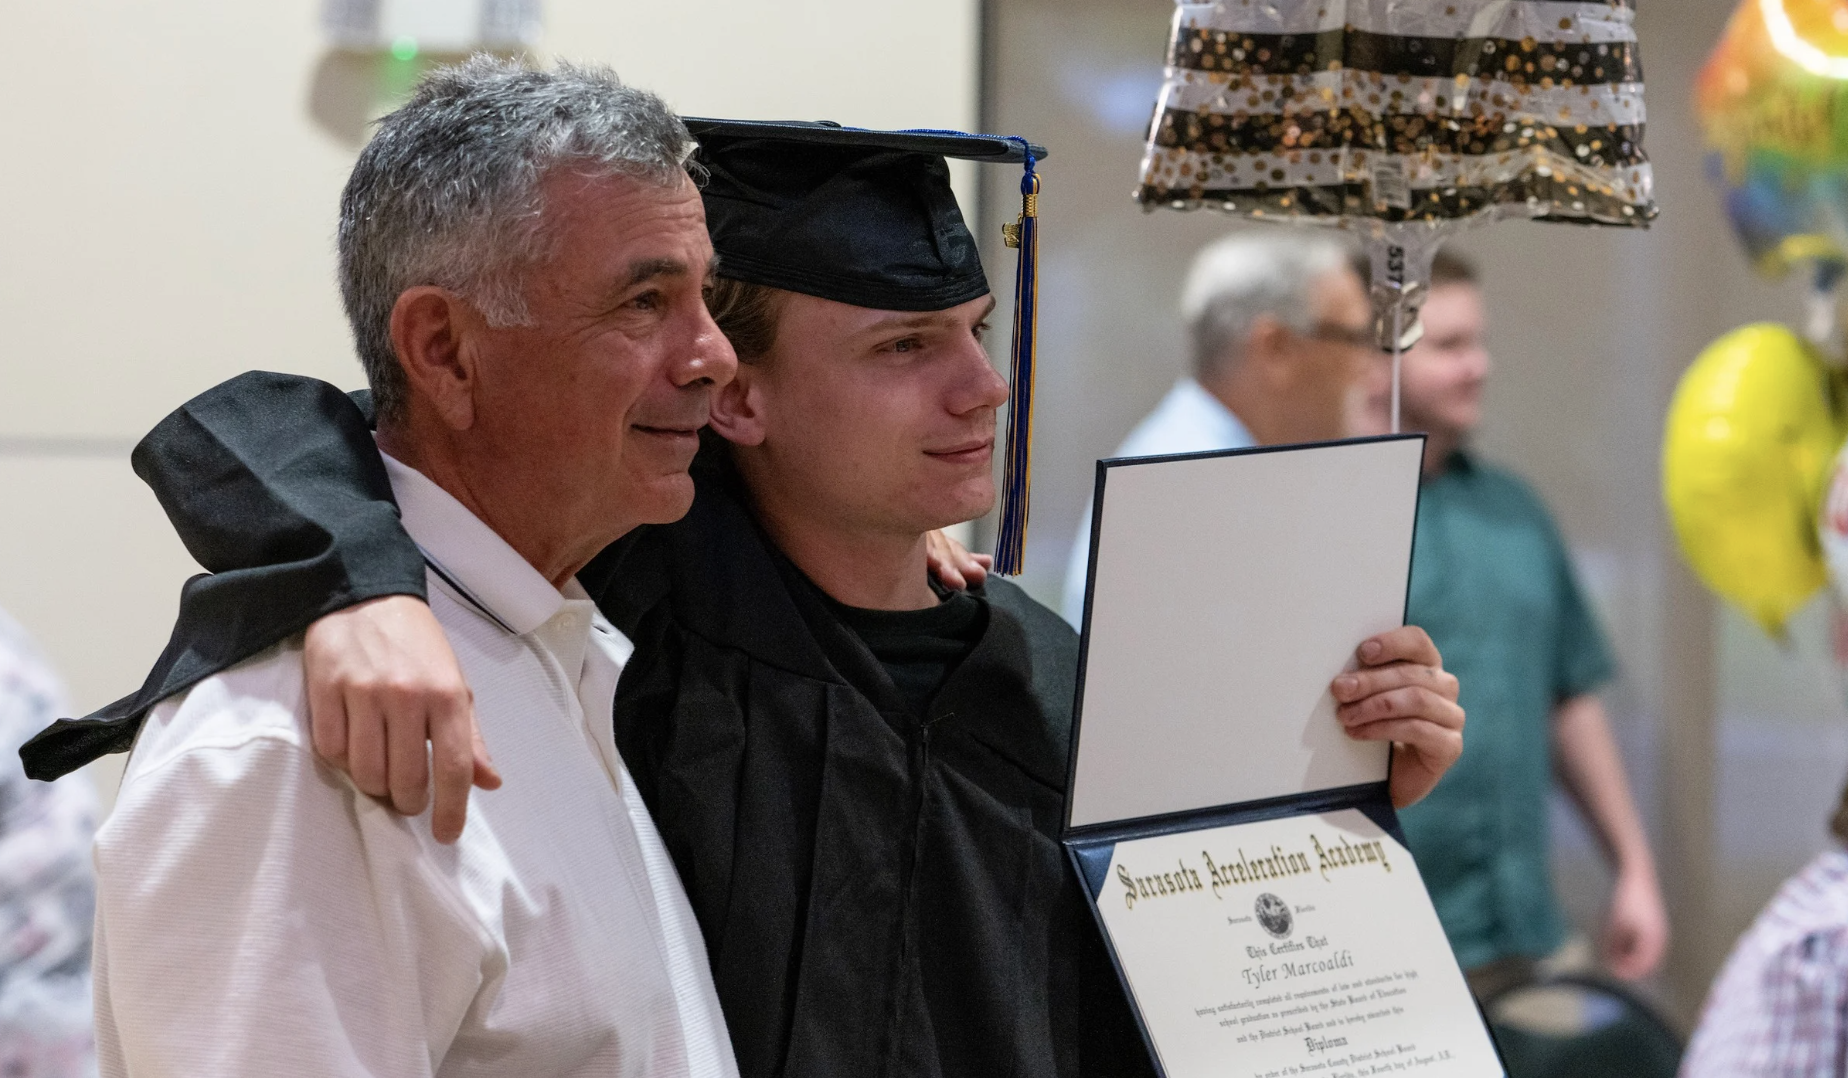 SAA grad proudly smiles at graduation with his father with diploma in hand